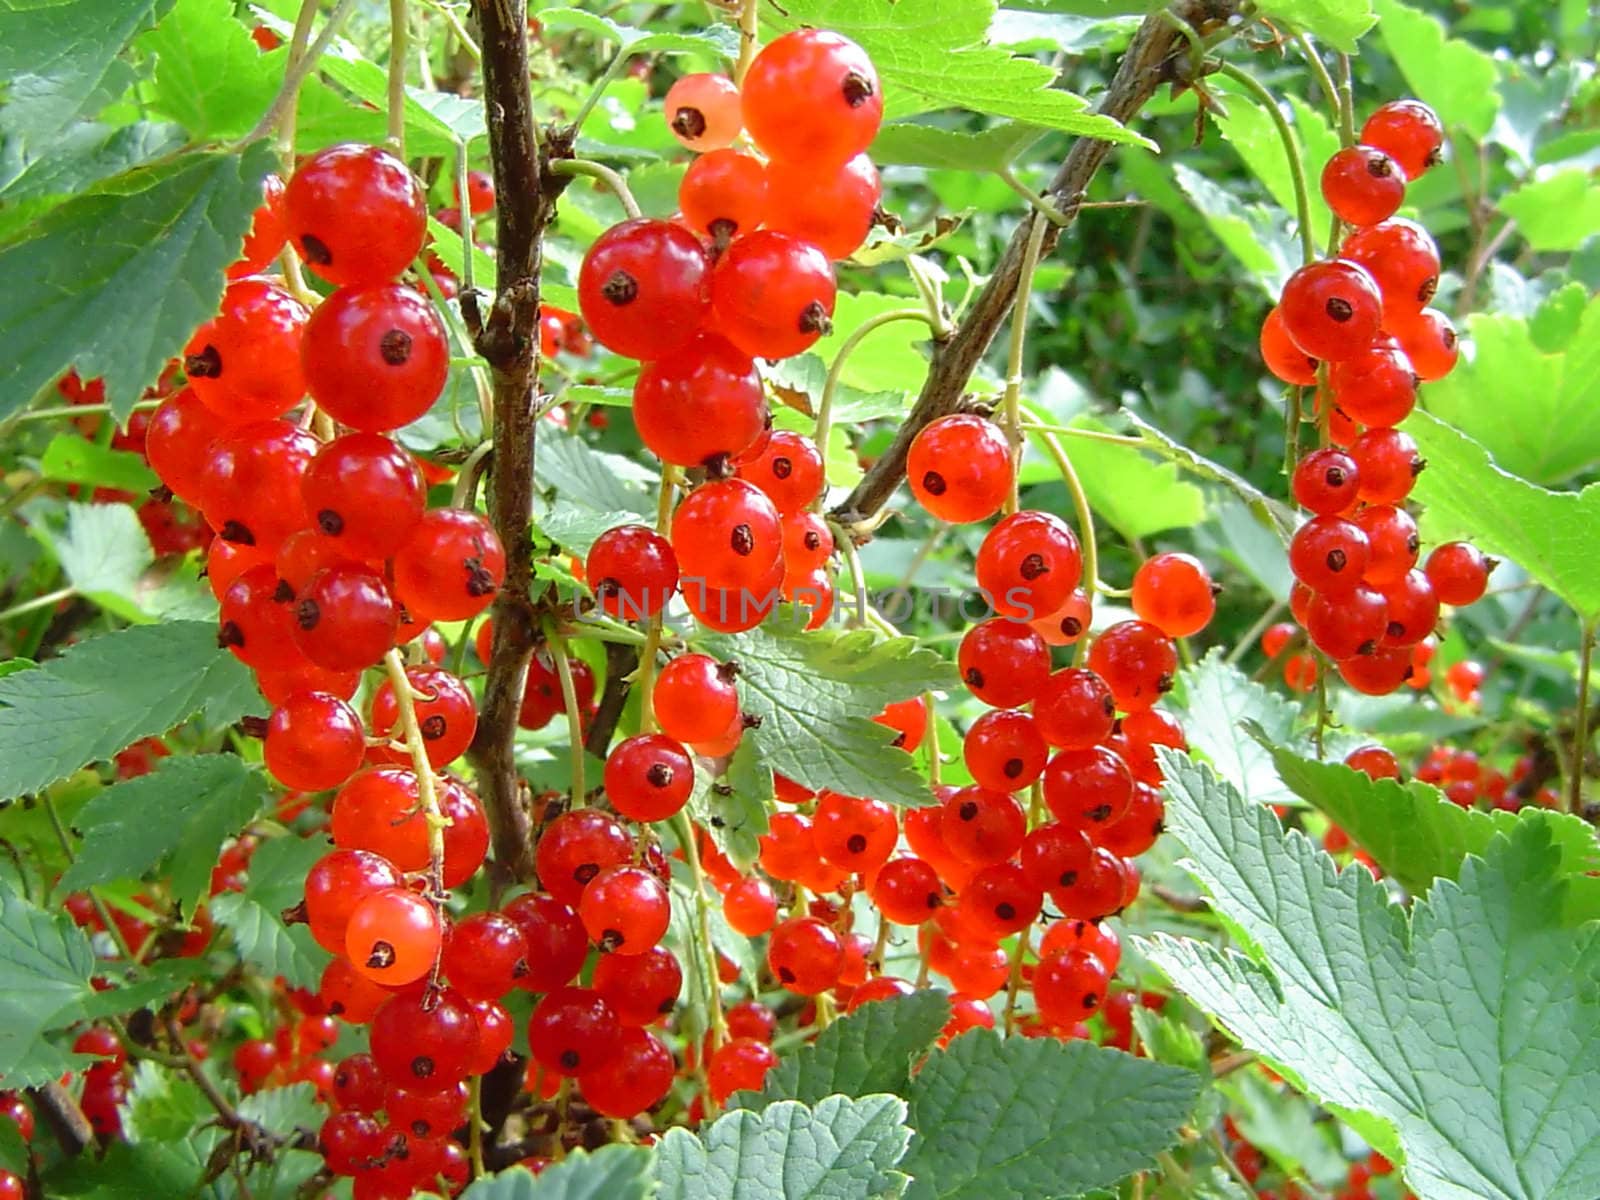 Juicy red currant in a garden                               